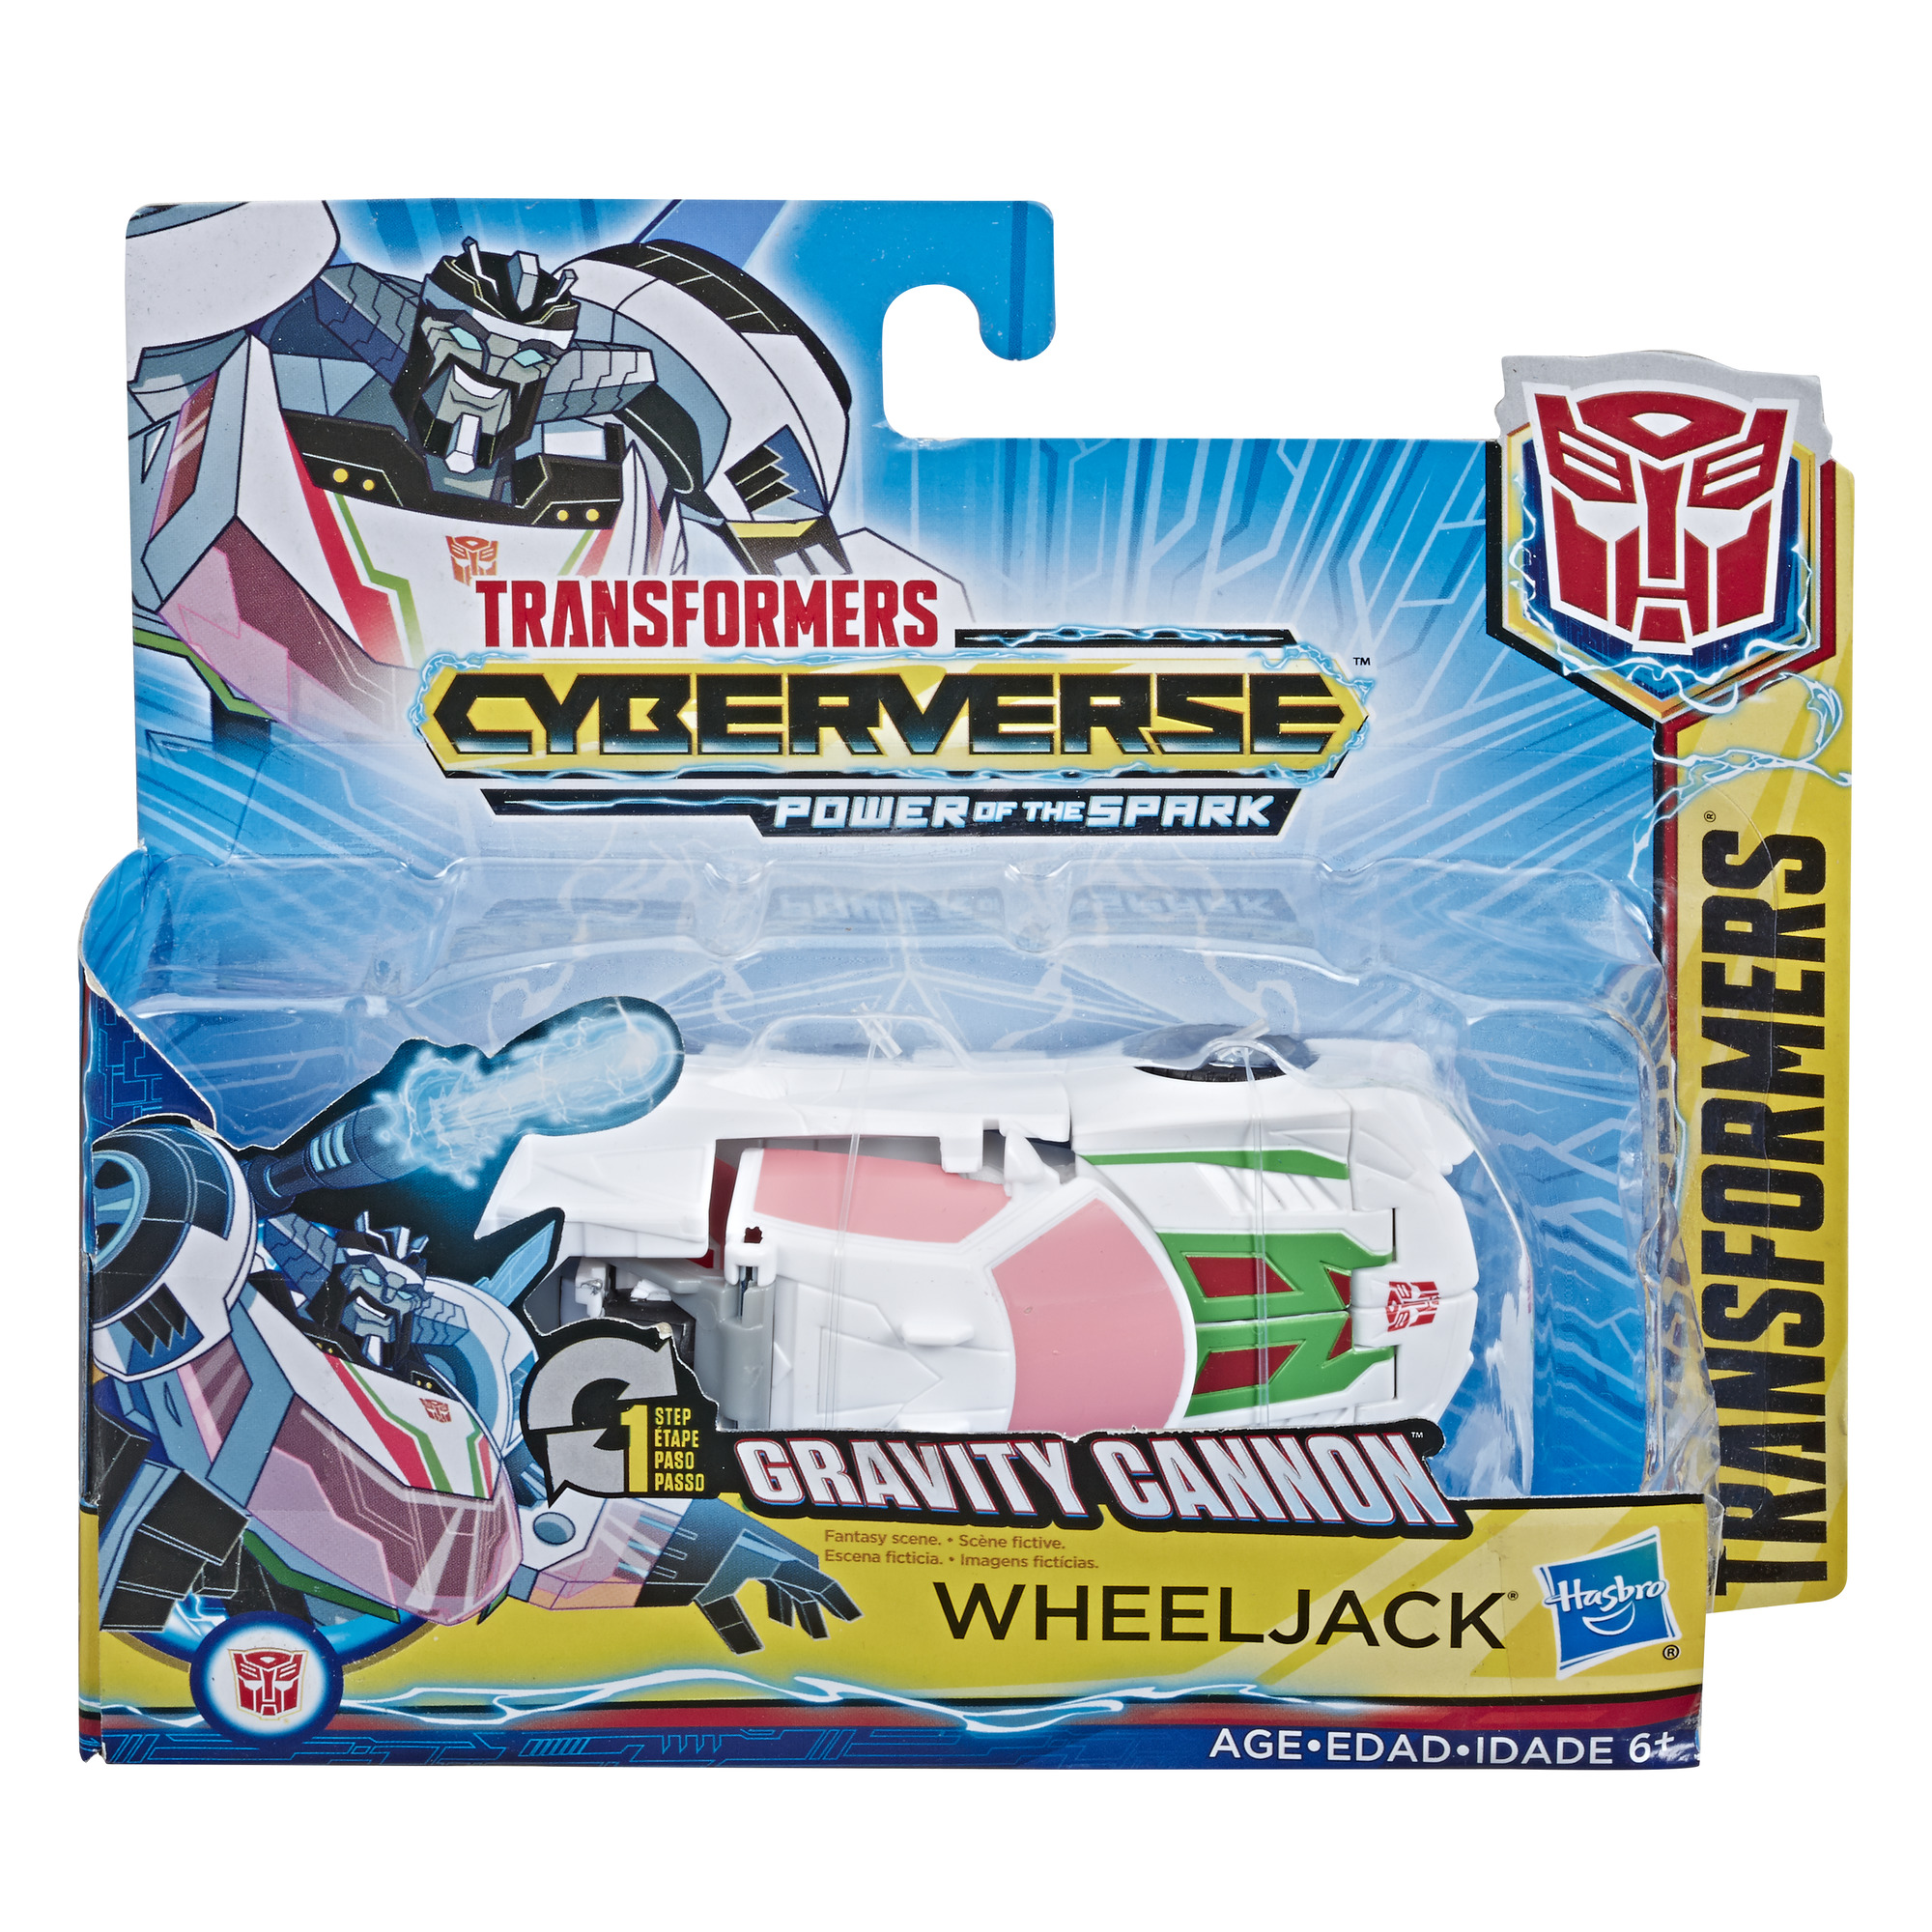 Transformers Cyberverse Action Attackers: 1-Step Changer Wheeljack Action Figure - image 3 of 5